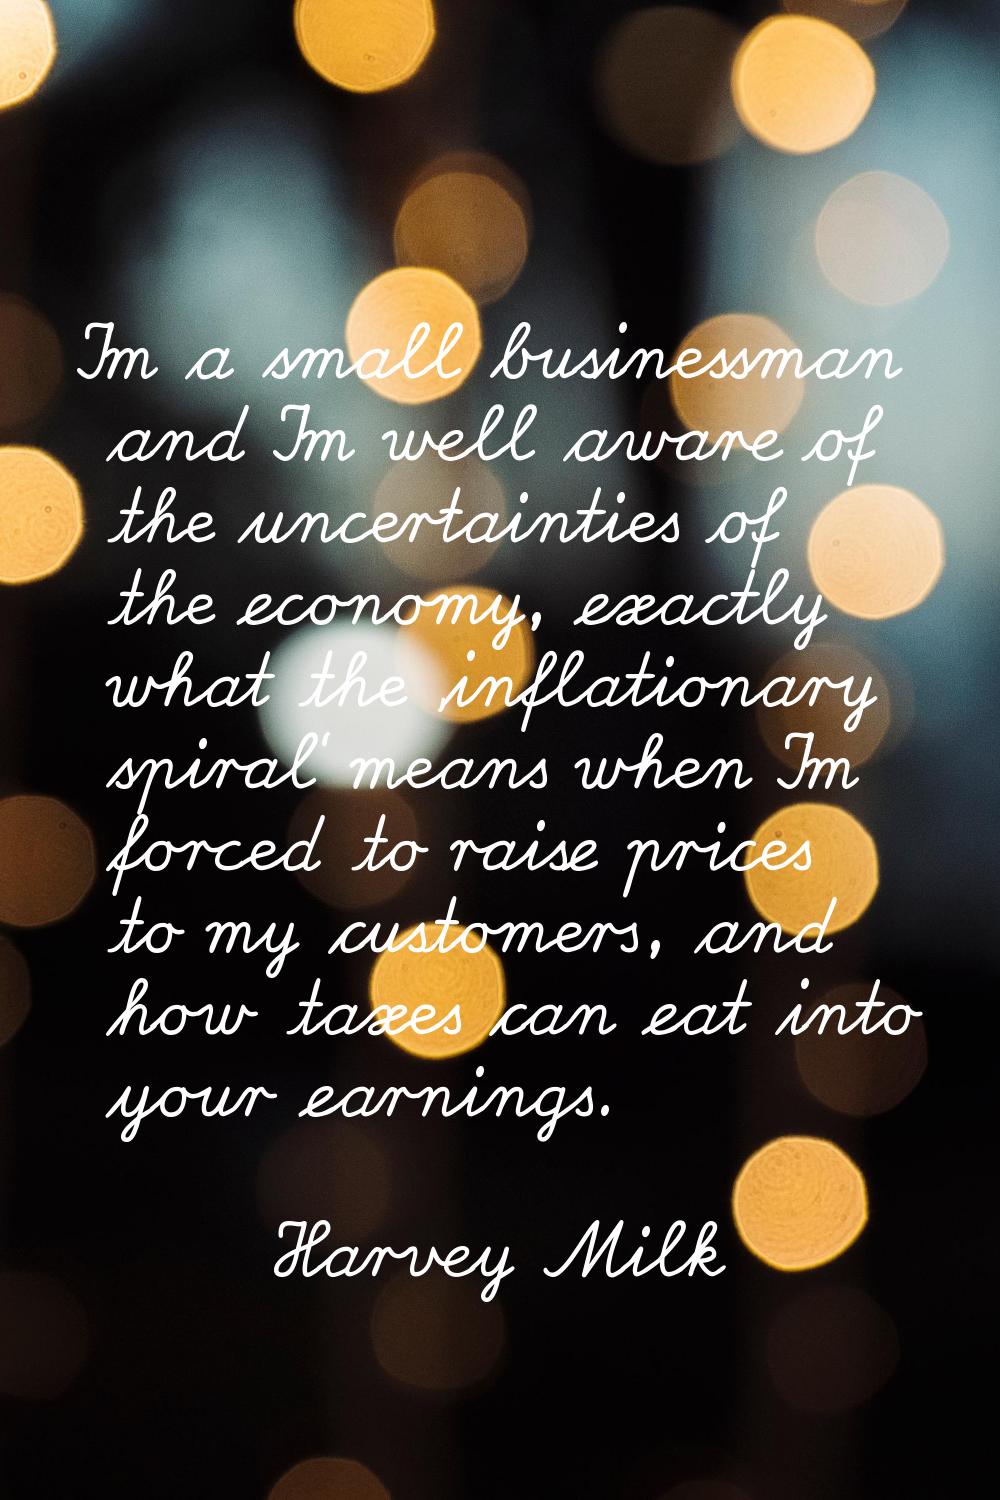 I'm a small businessman and I'm well aware of the uncertainties of the economy, exactly what the 'i